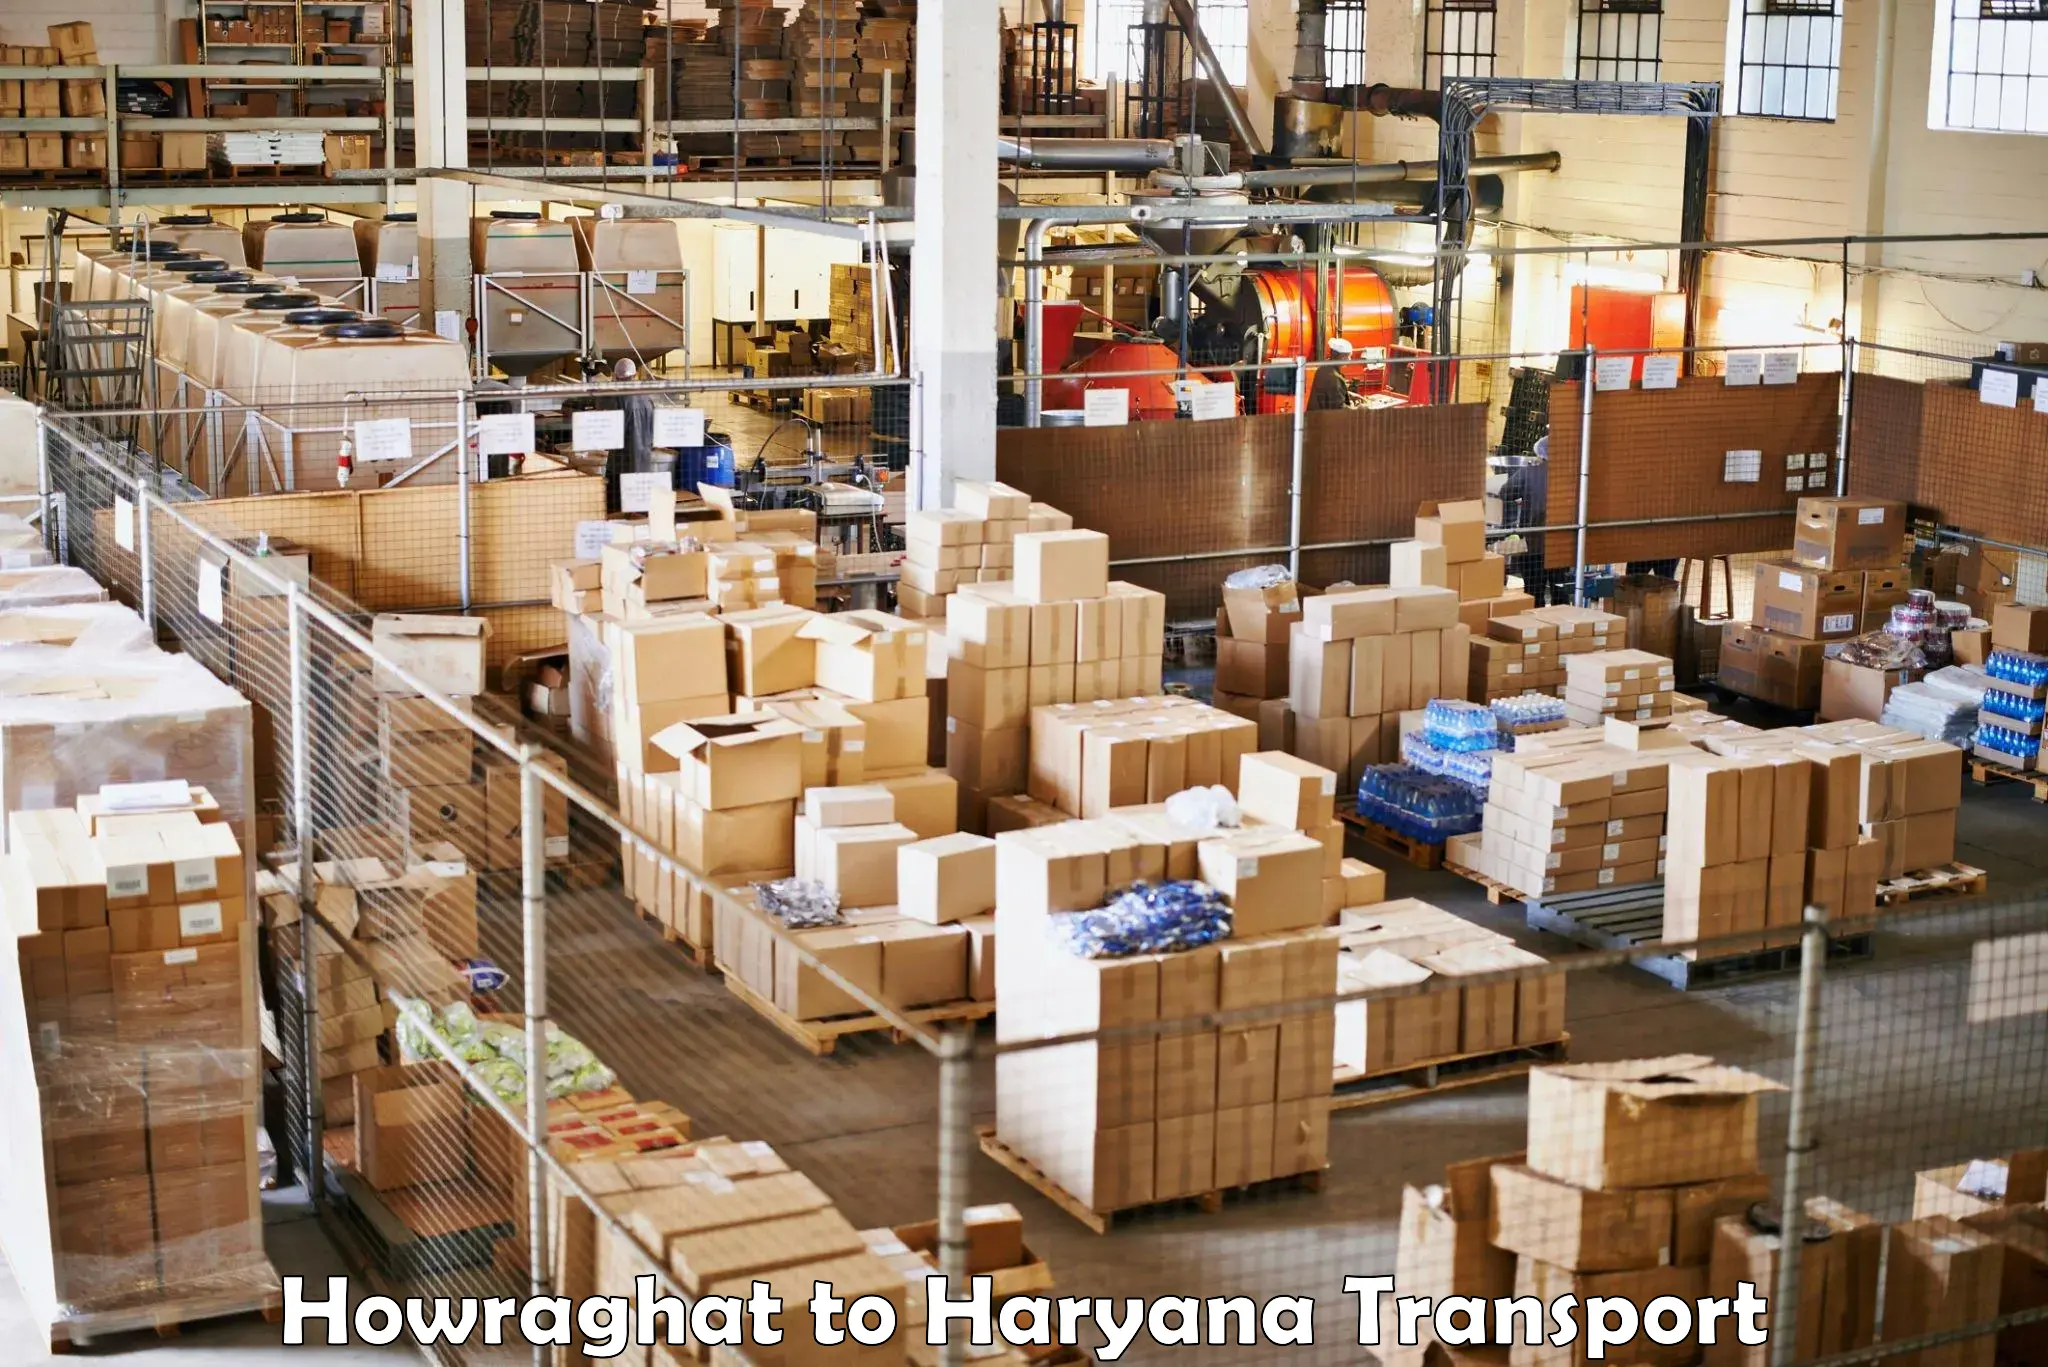 Parcel transport services Howraghat to Narwana